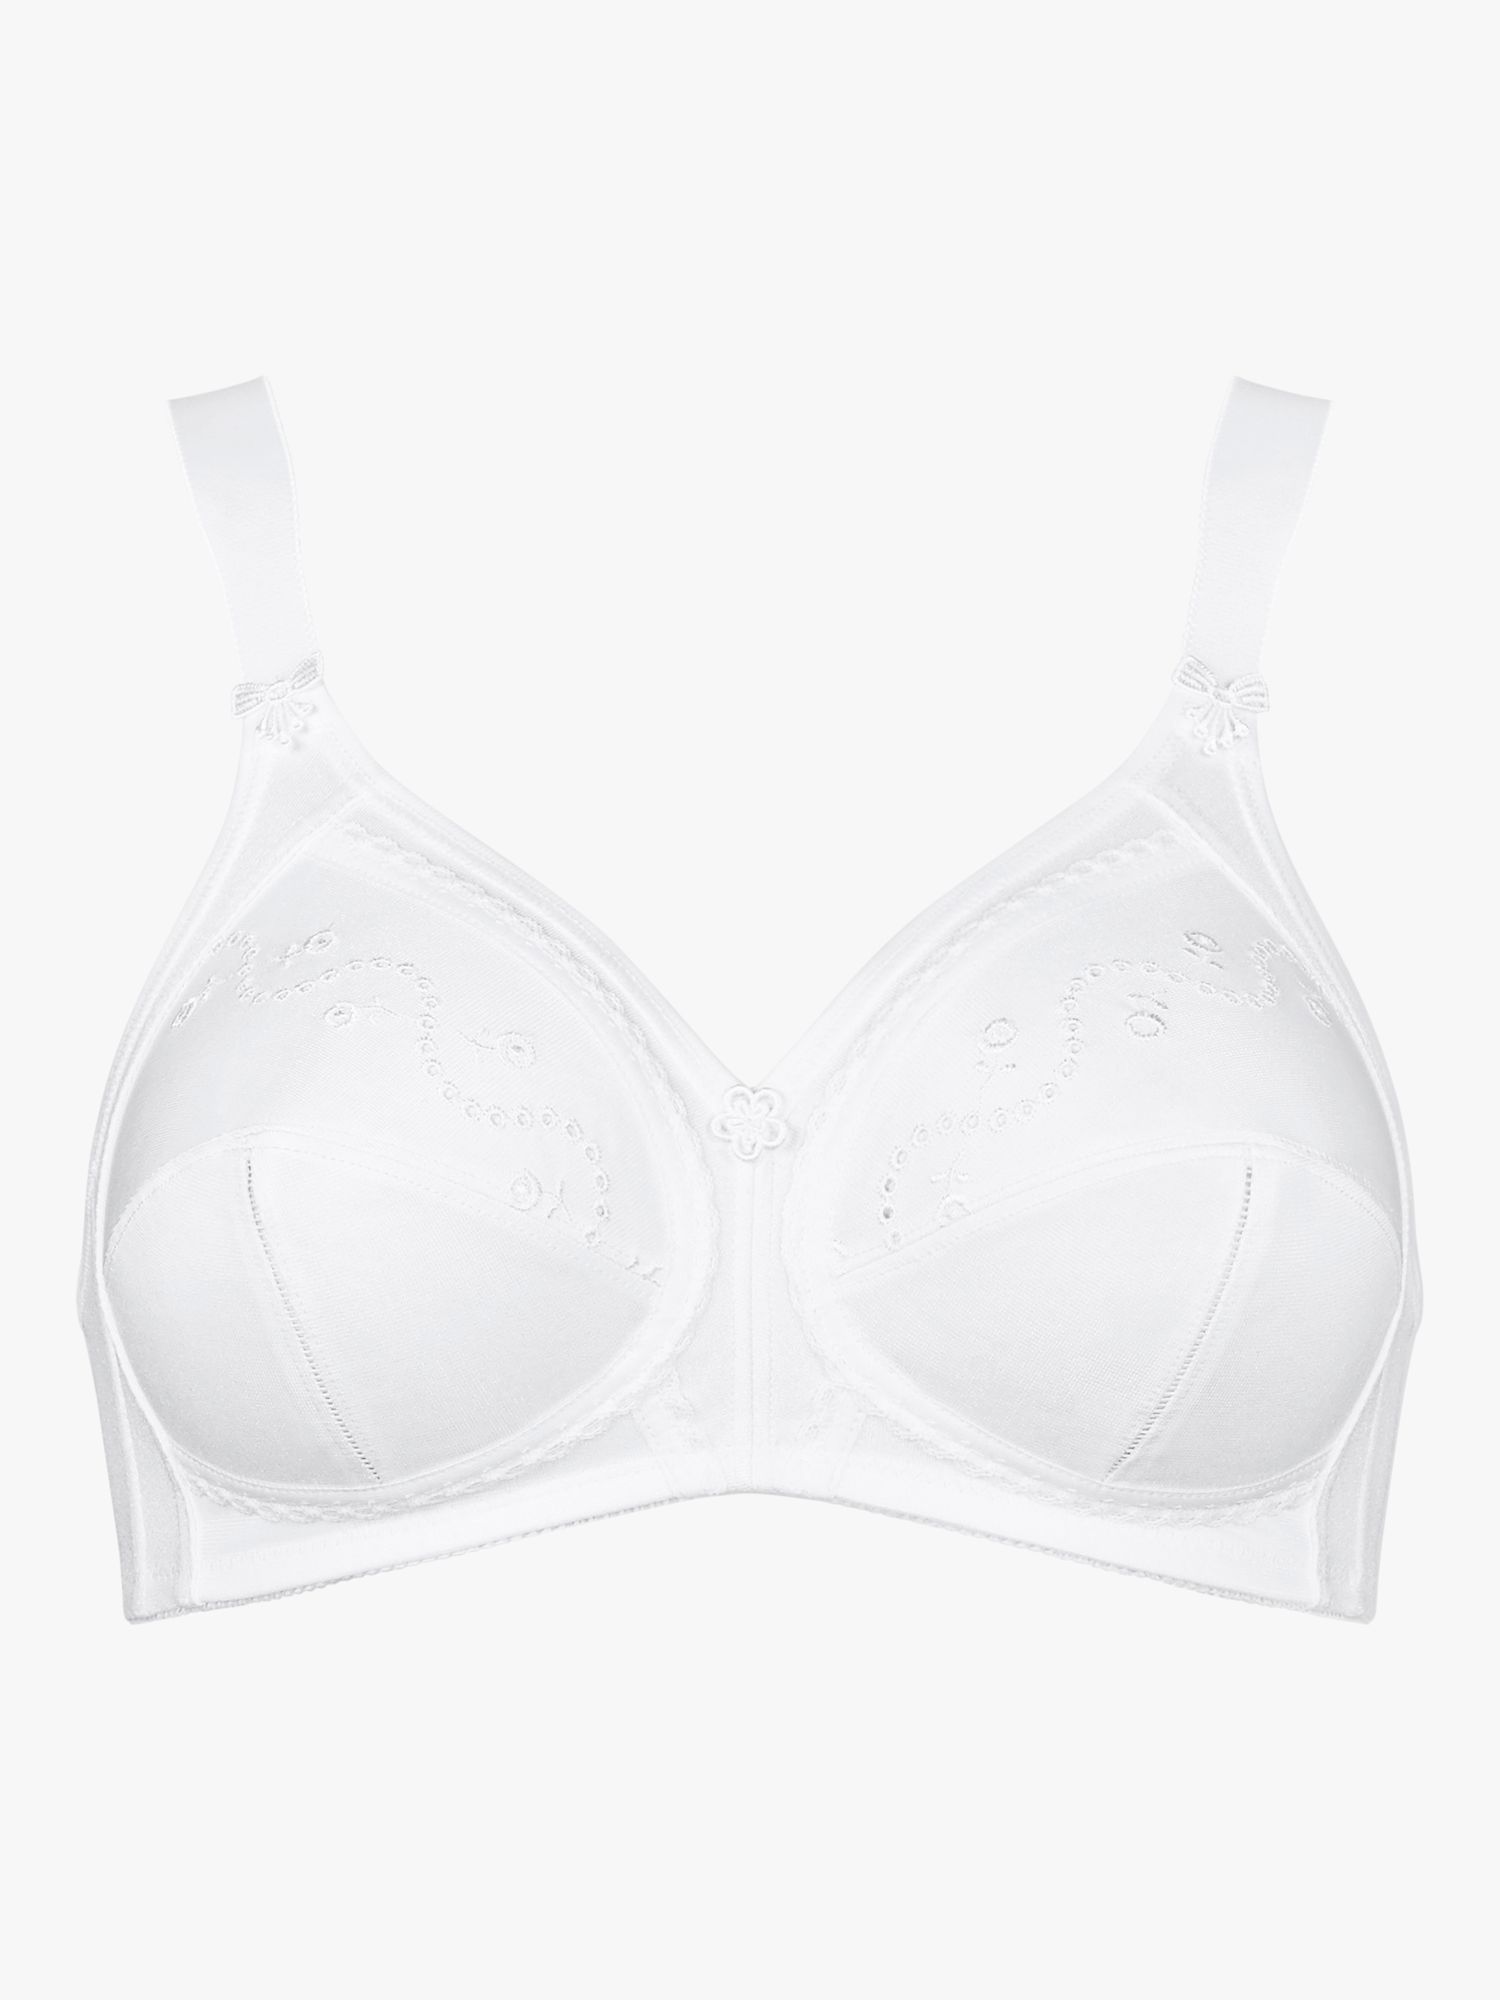 Triumph Fit Smart Non Wired Bra, Malaga at John Lewis & Partners